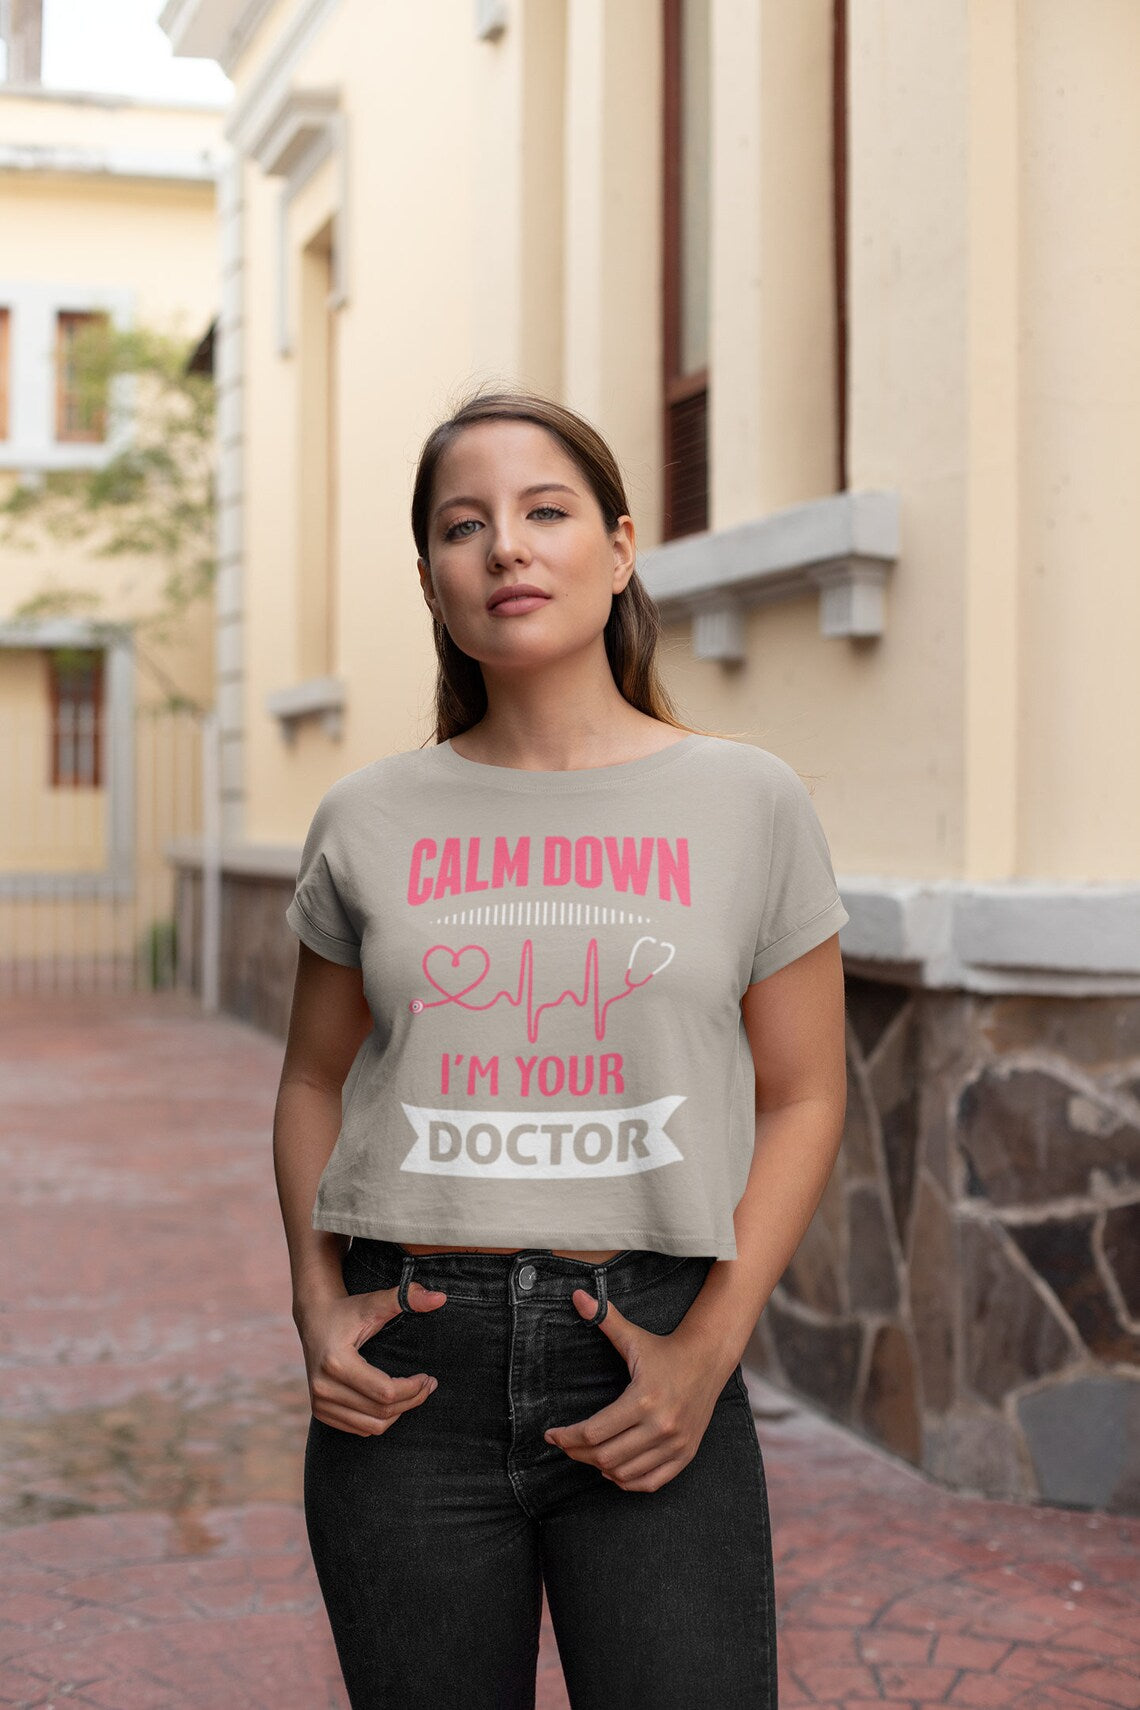 Calm Down I'm Your Doctor Women's Flowy Cropped Tee, Doctor shirts, Doctor gift ideas, New Doctor shirt, gift for doctors, Doctor team shirt